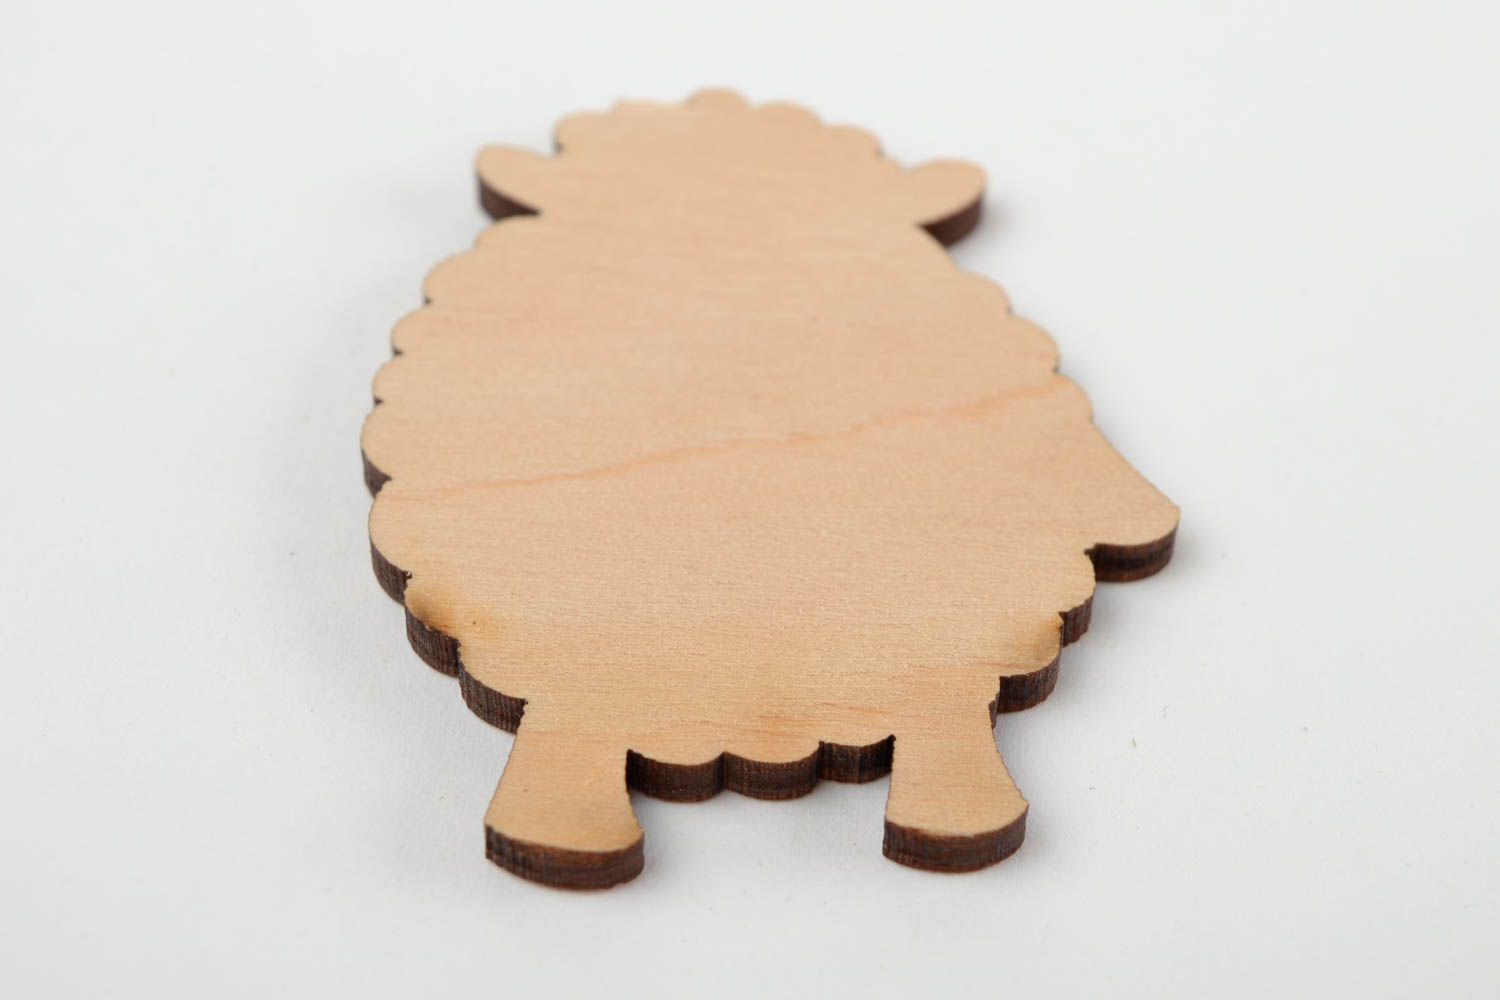 Handmade wooden fridge magnet cute unusual toy art blank for painting photo 5